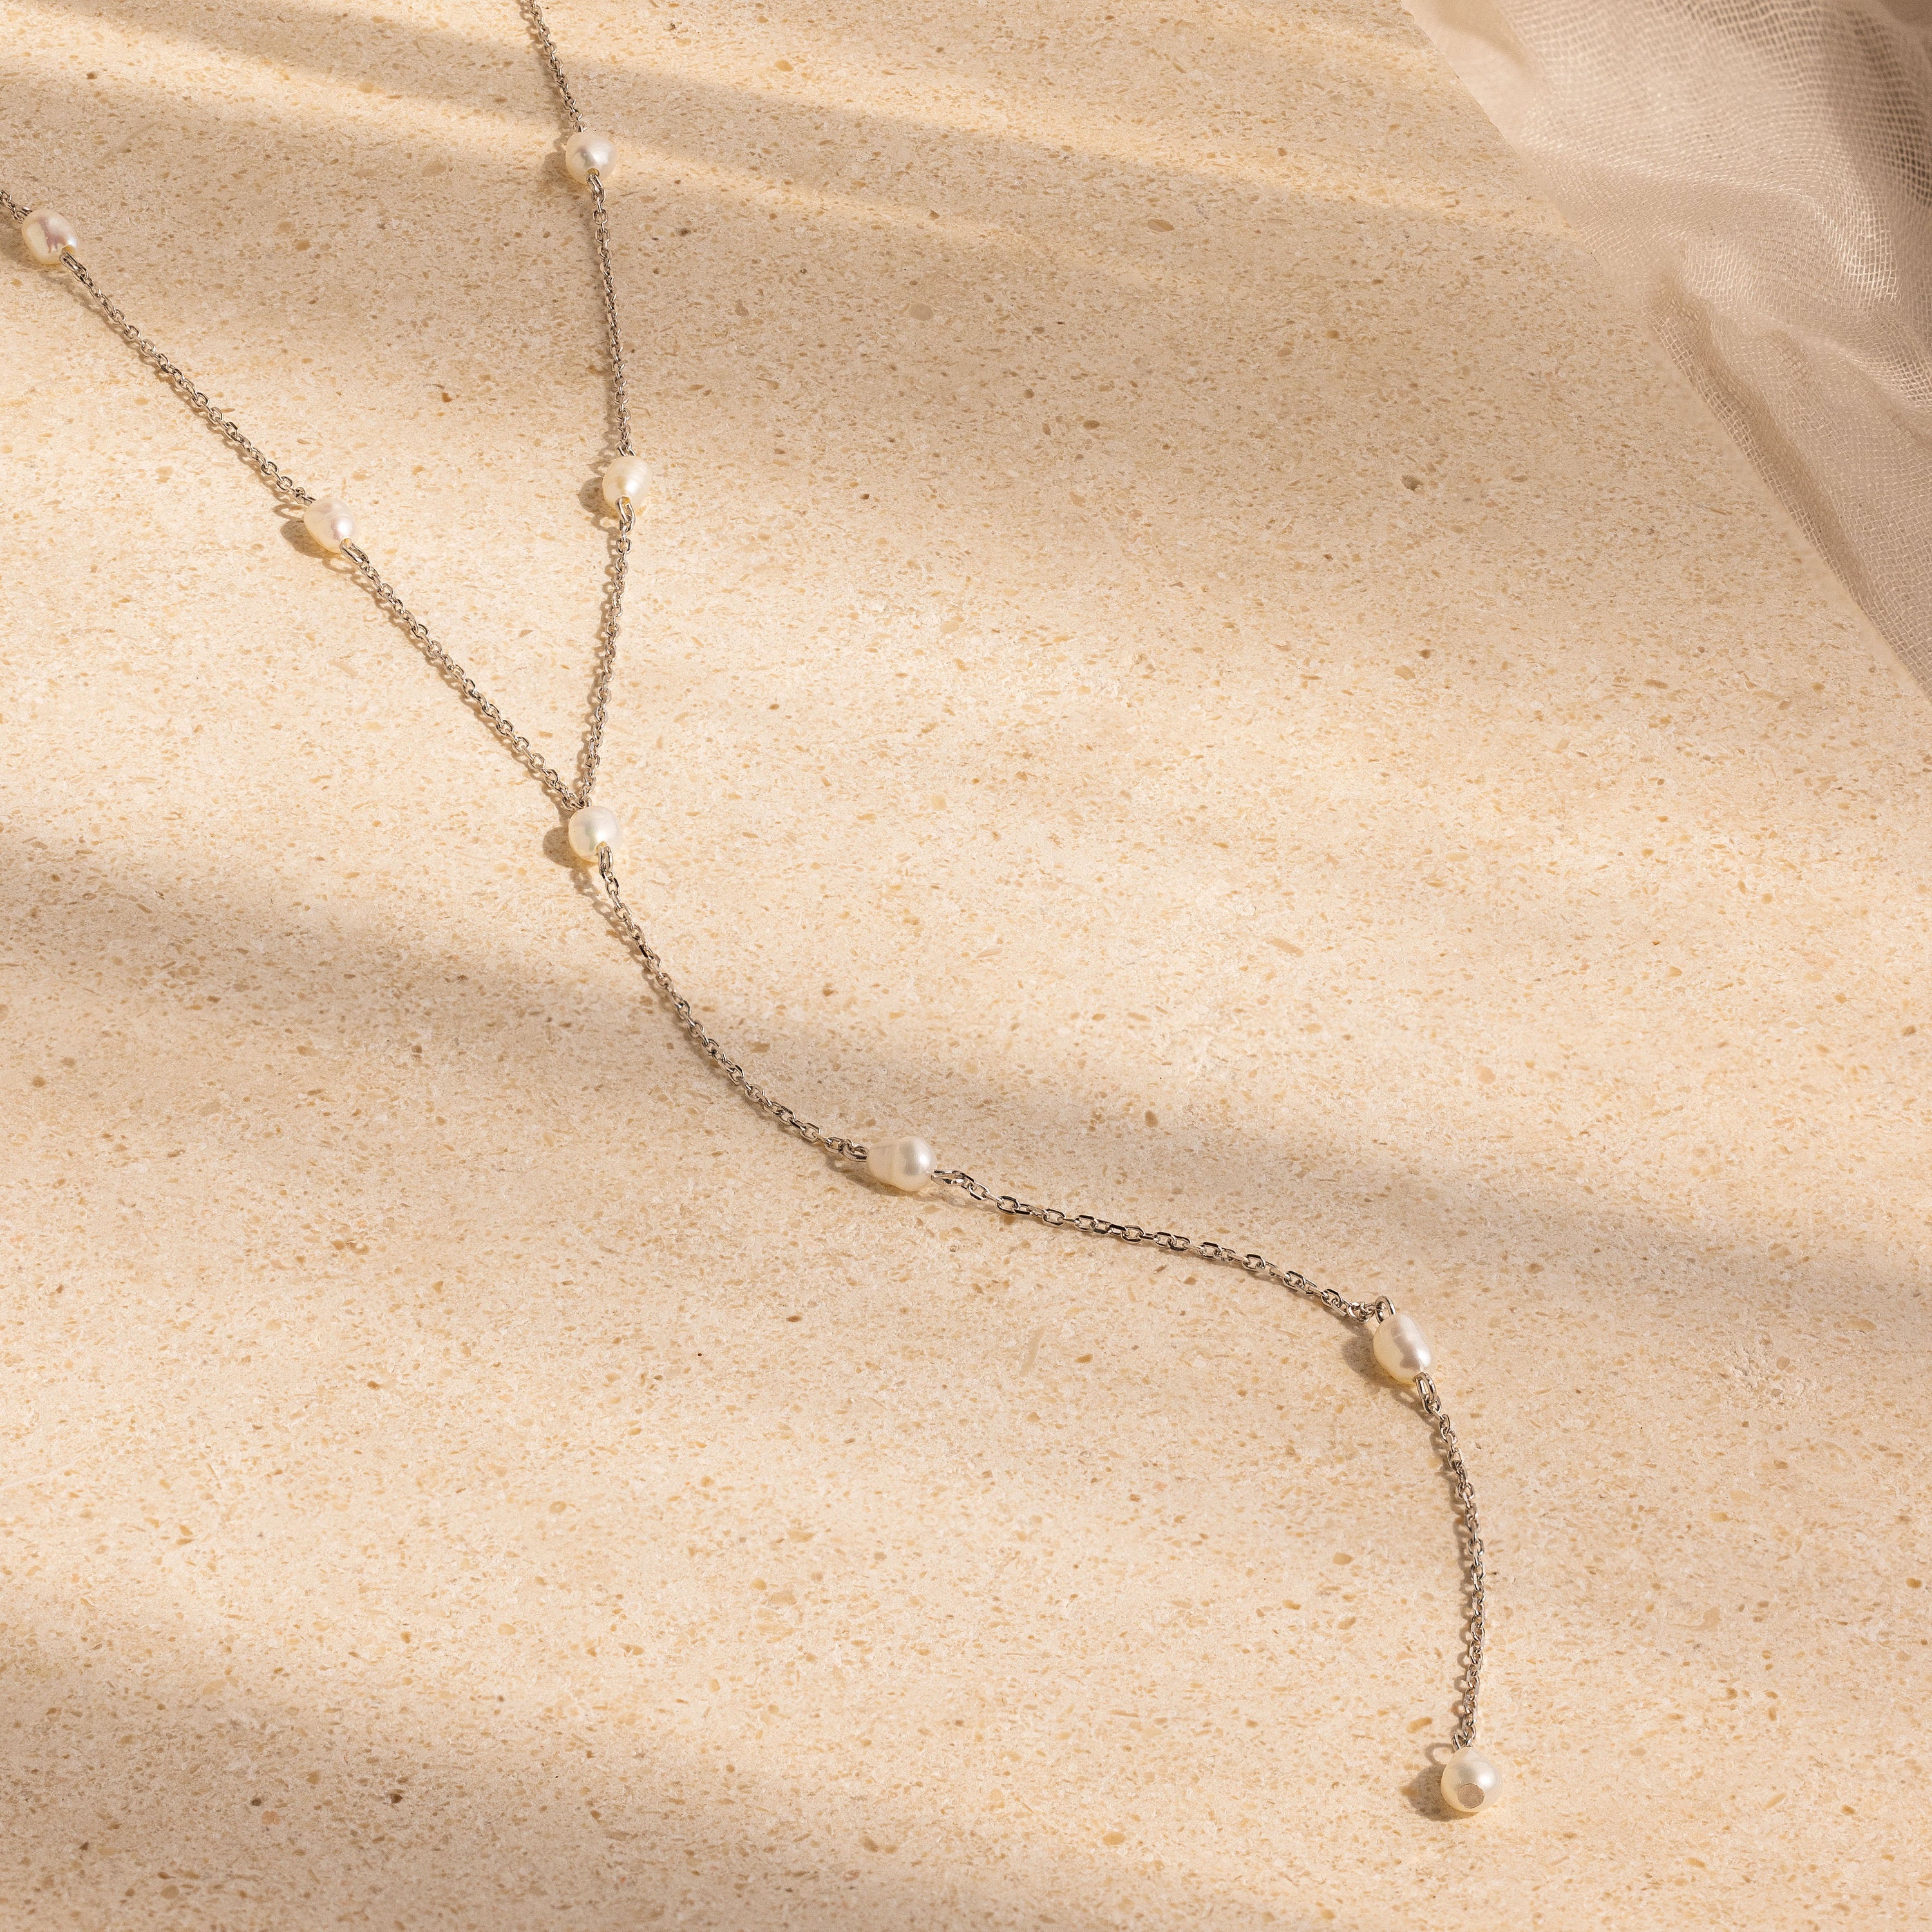 Pearl Station Lariat Necklace